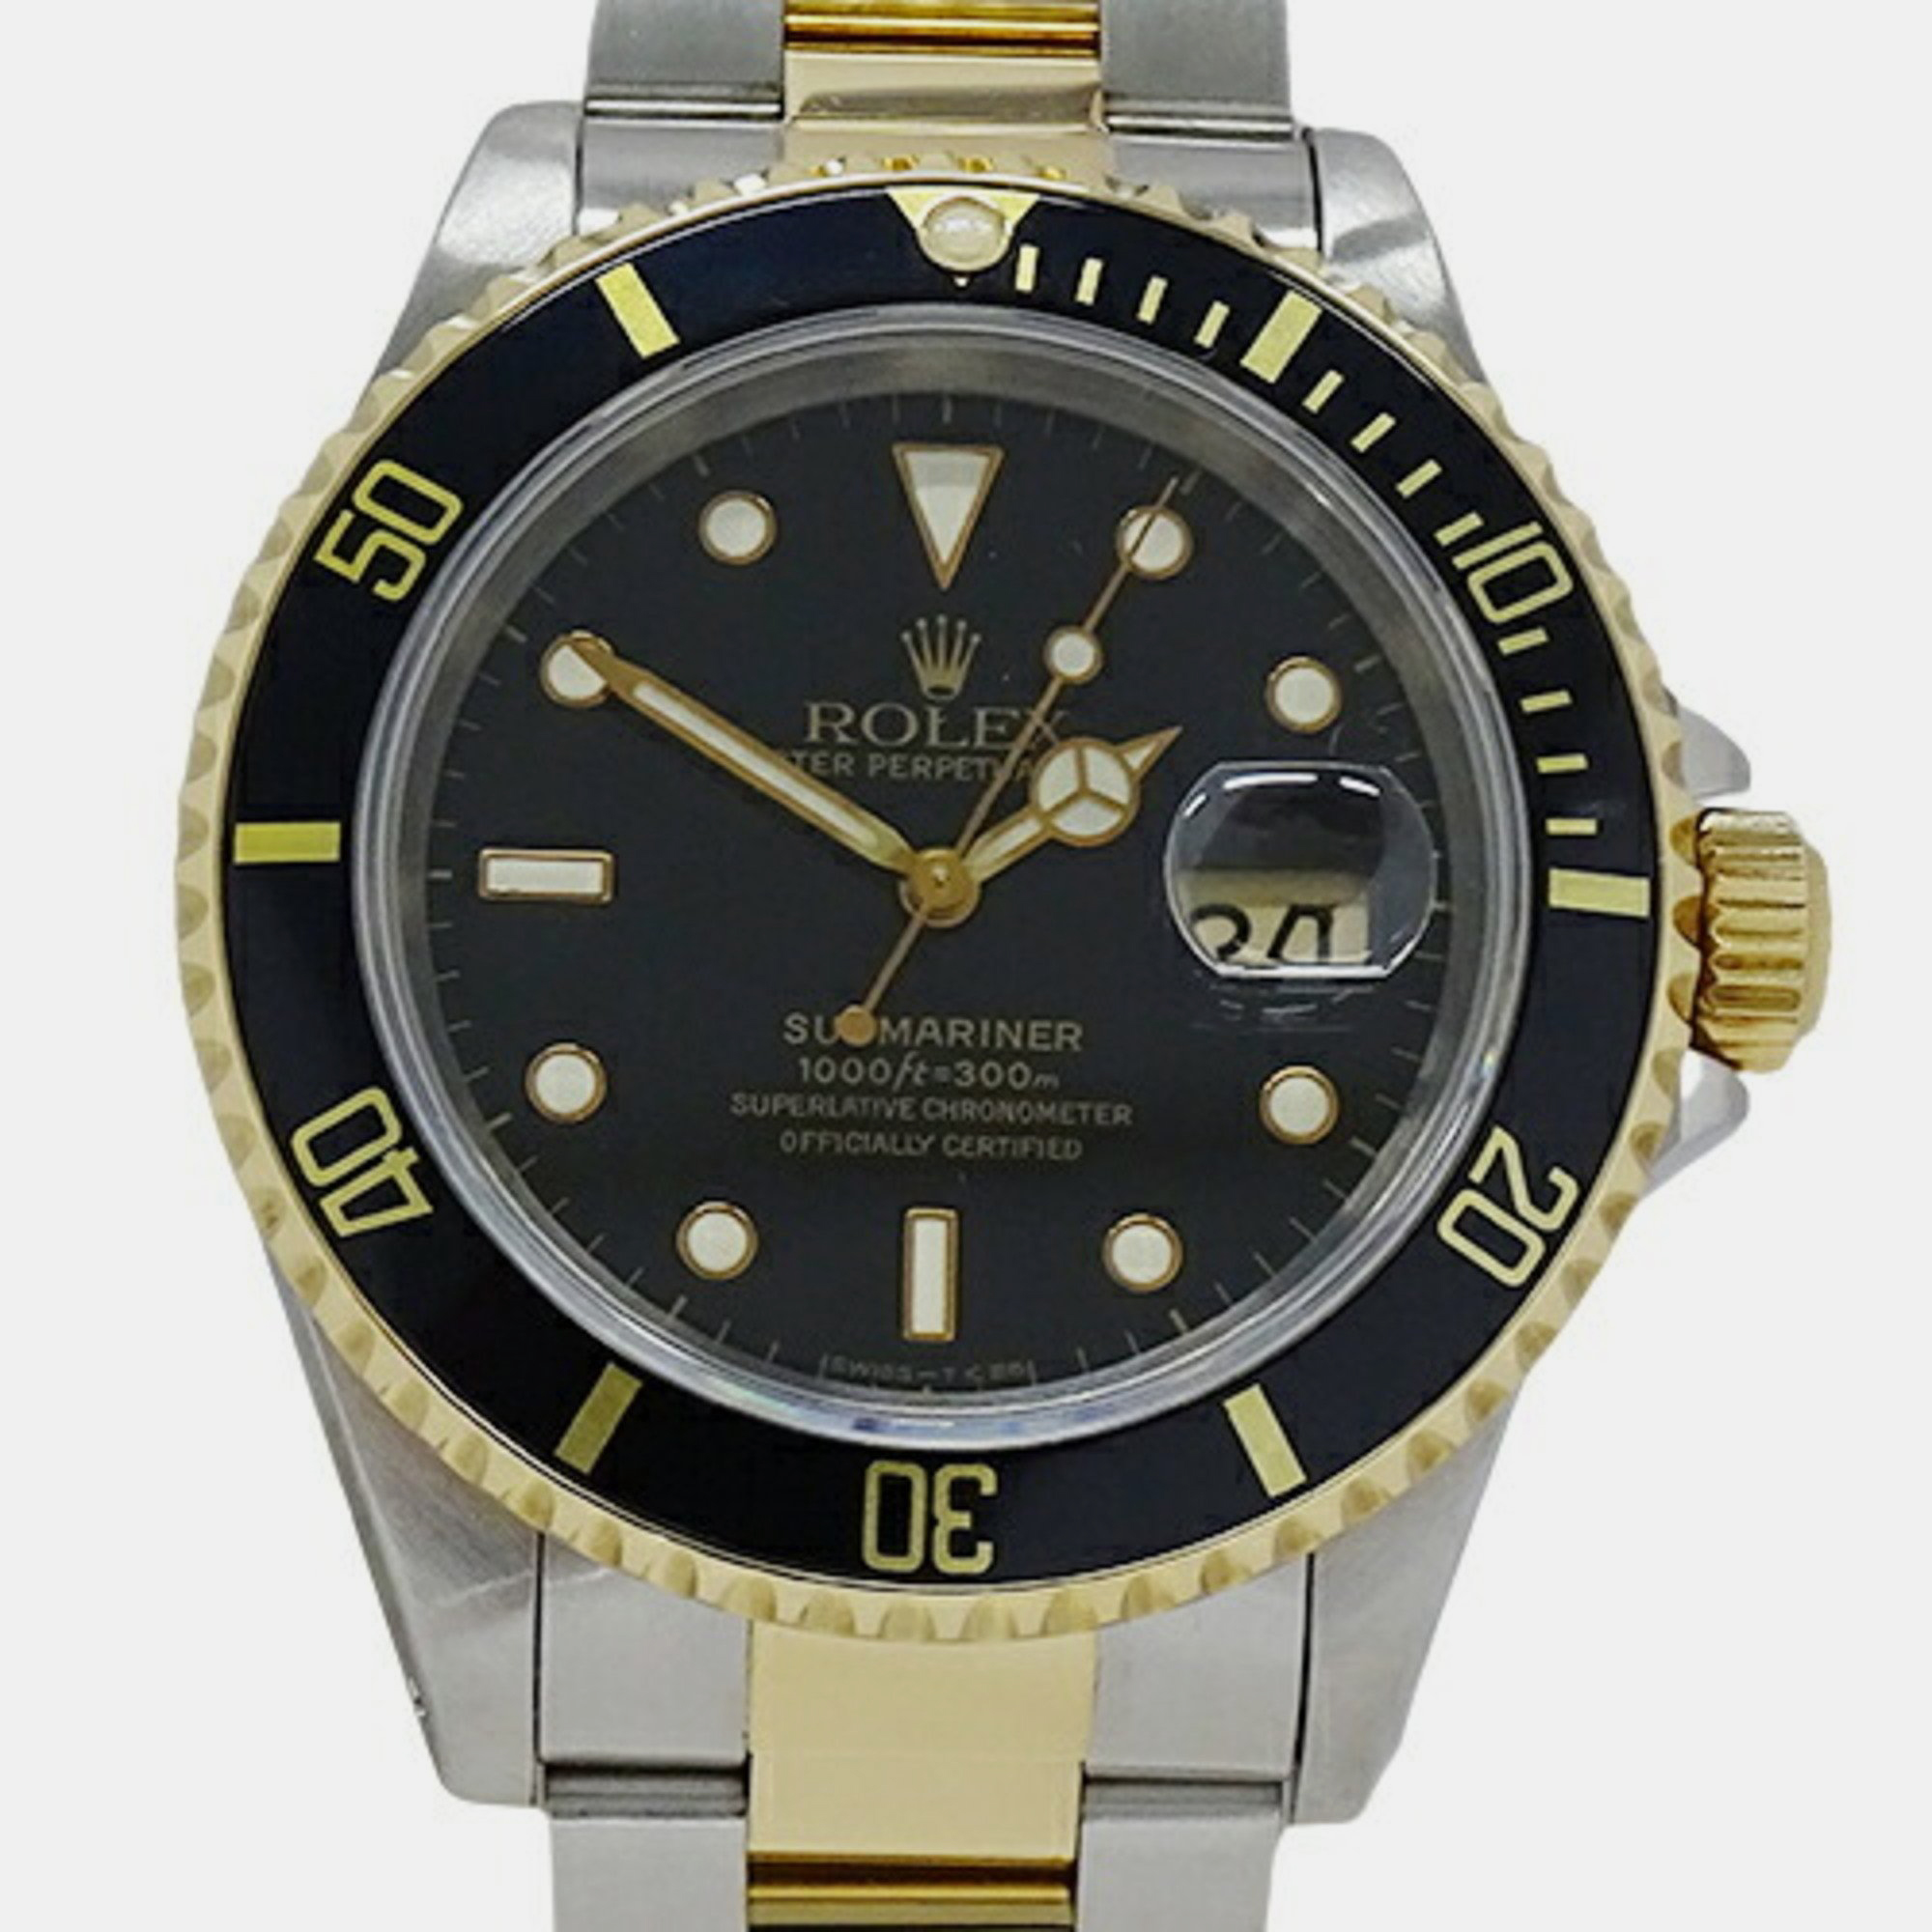 Rolex Black 18k Yellow Gold And Stainless Steel Submariner 16613 Automatic Men's Wristwatch 40 Mm